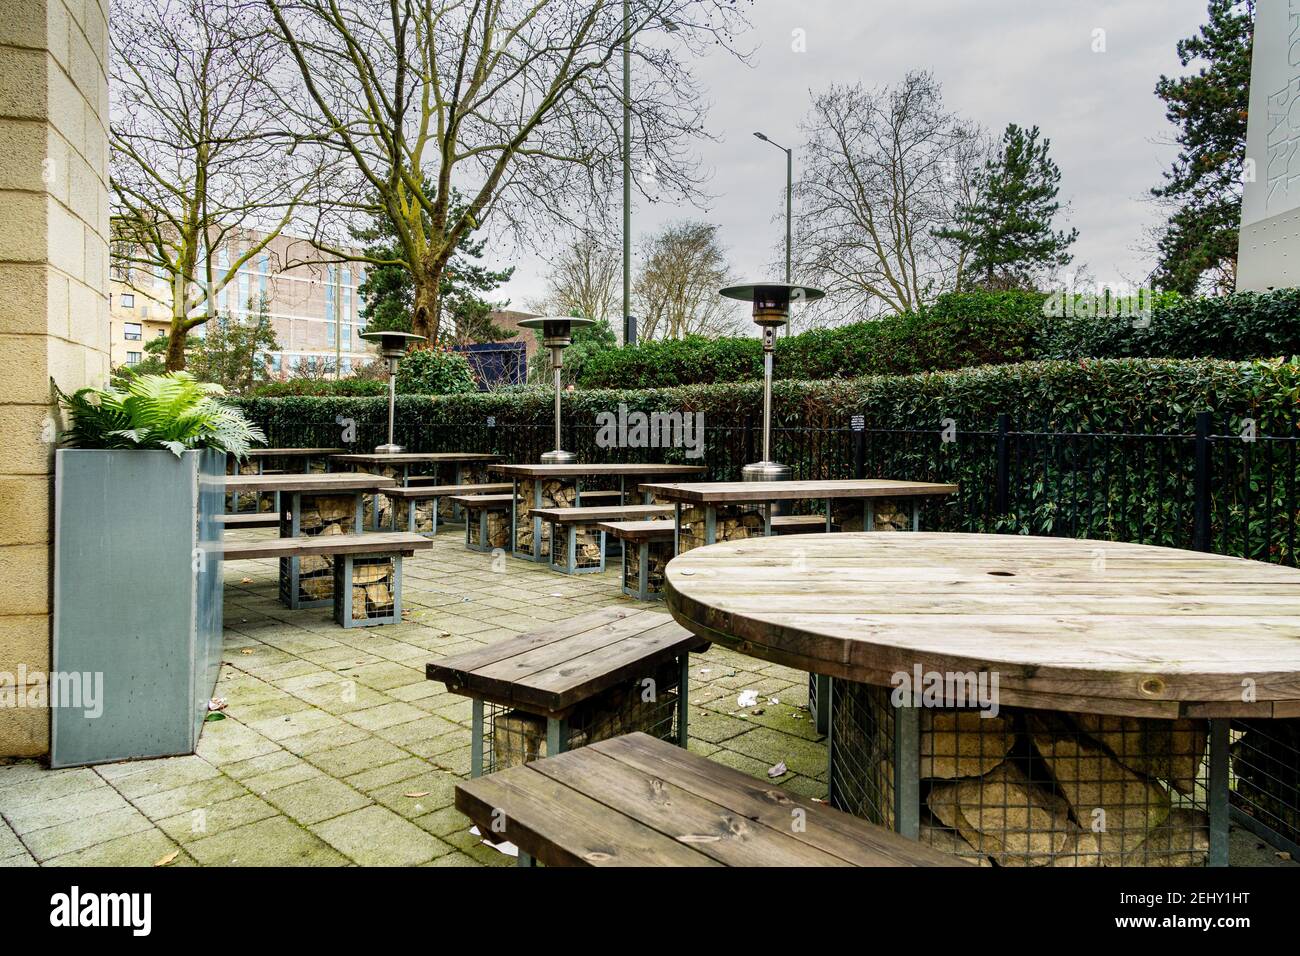 An empty pub beer garden during the covid19 lockdown in London, UK. Patio heaters and wooden bench and tables surrounded by green plants. Stock Photo